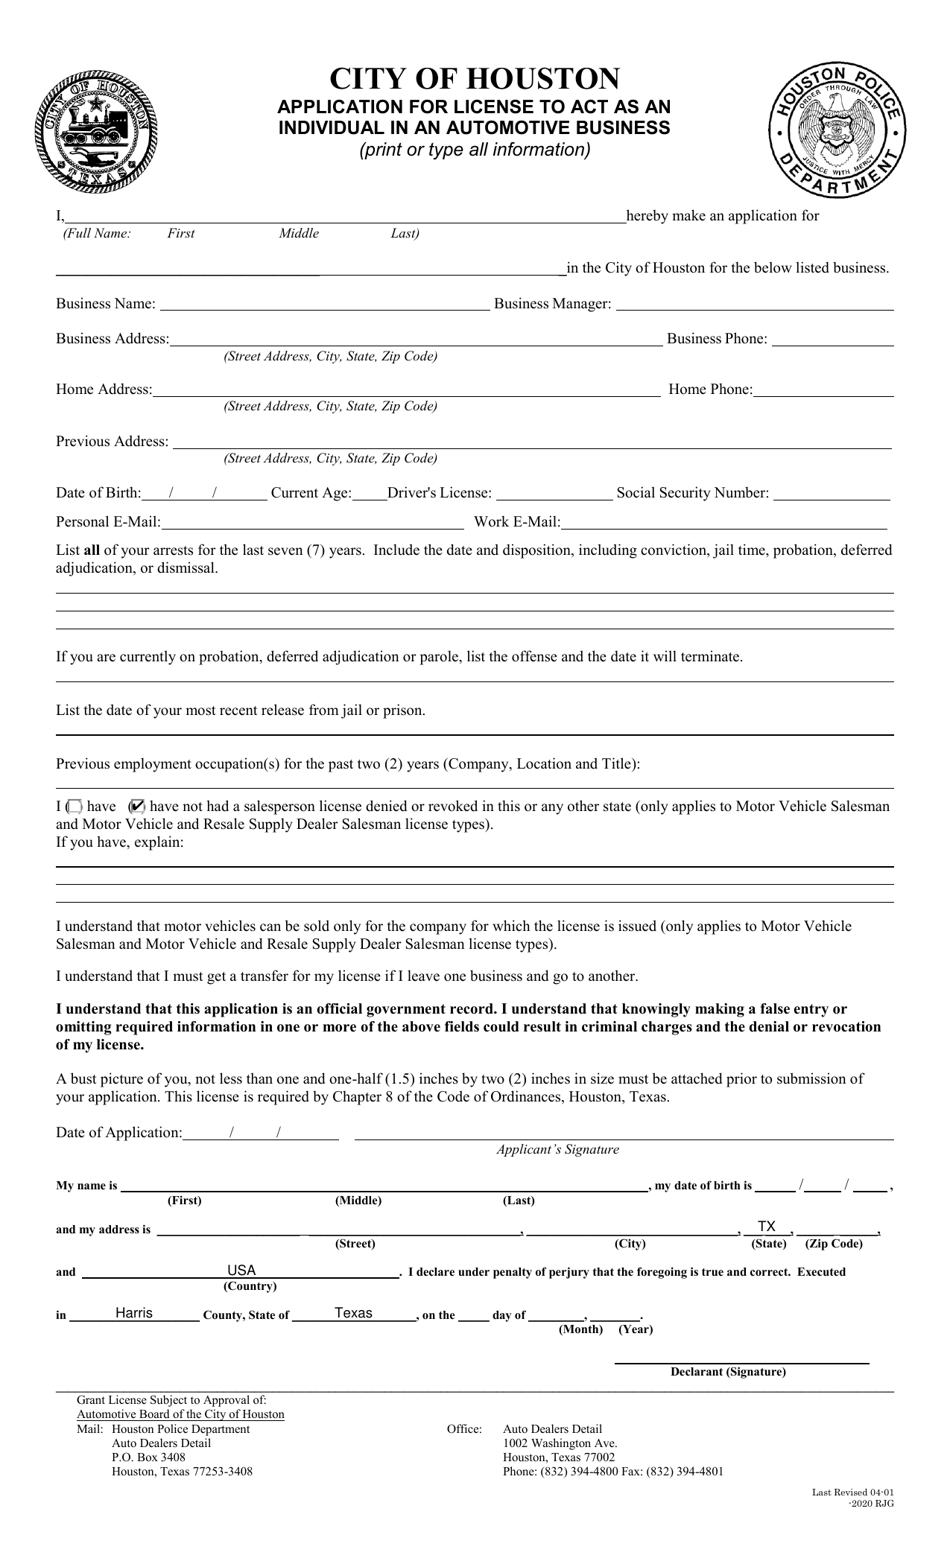 Application for License to Act as an Individual in an Automotive Business - City of Houston, Texas, Page 1